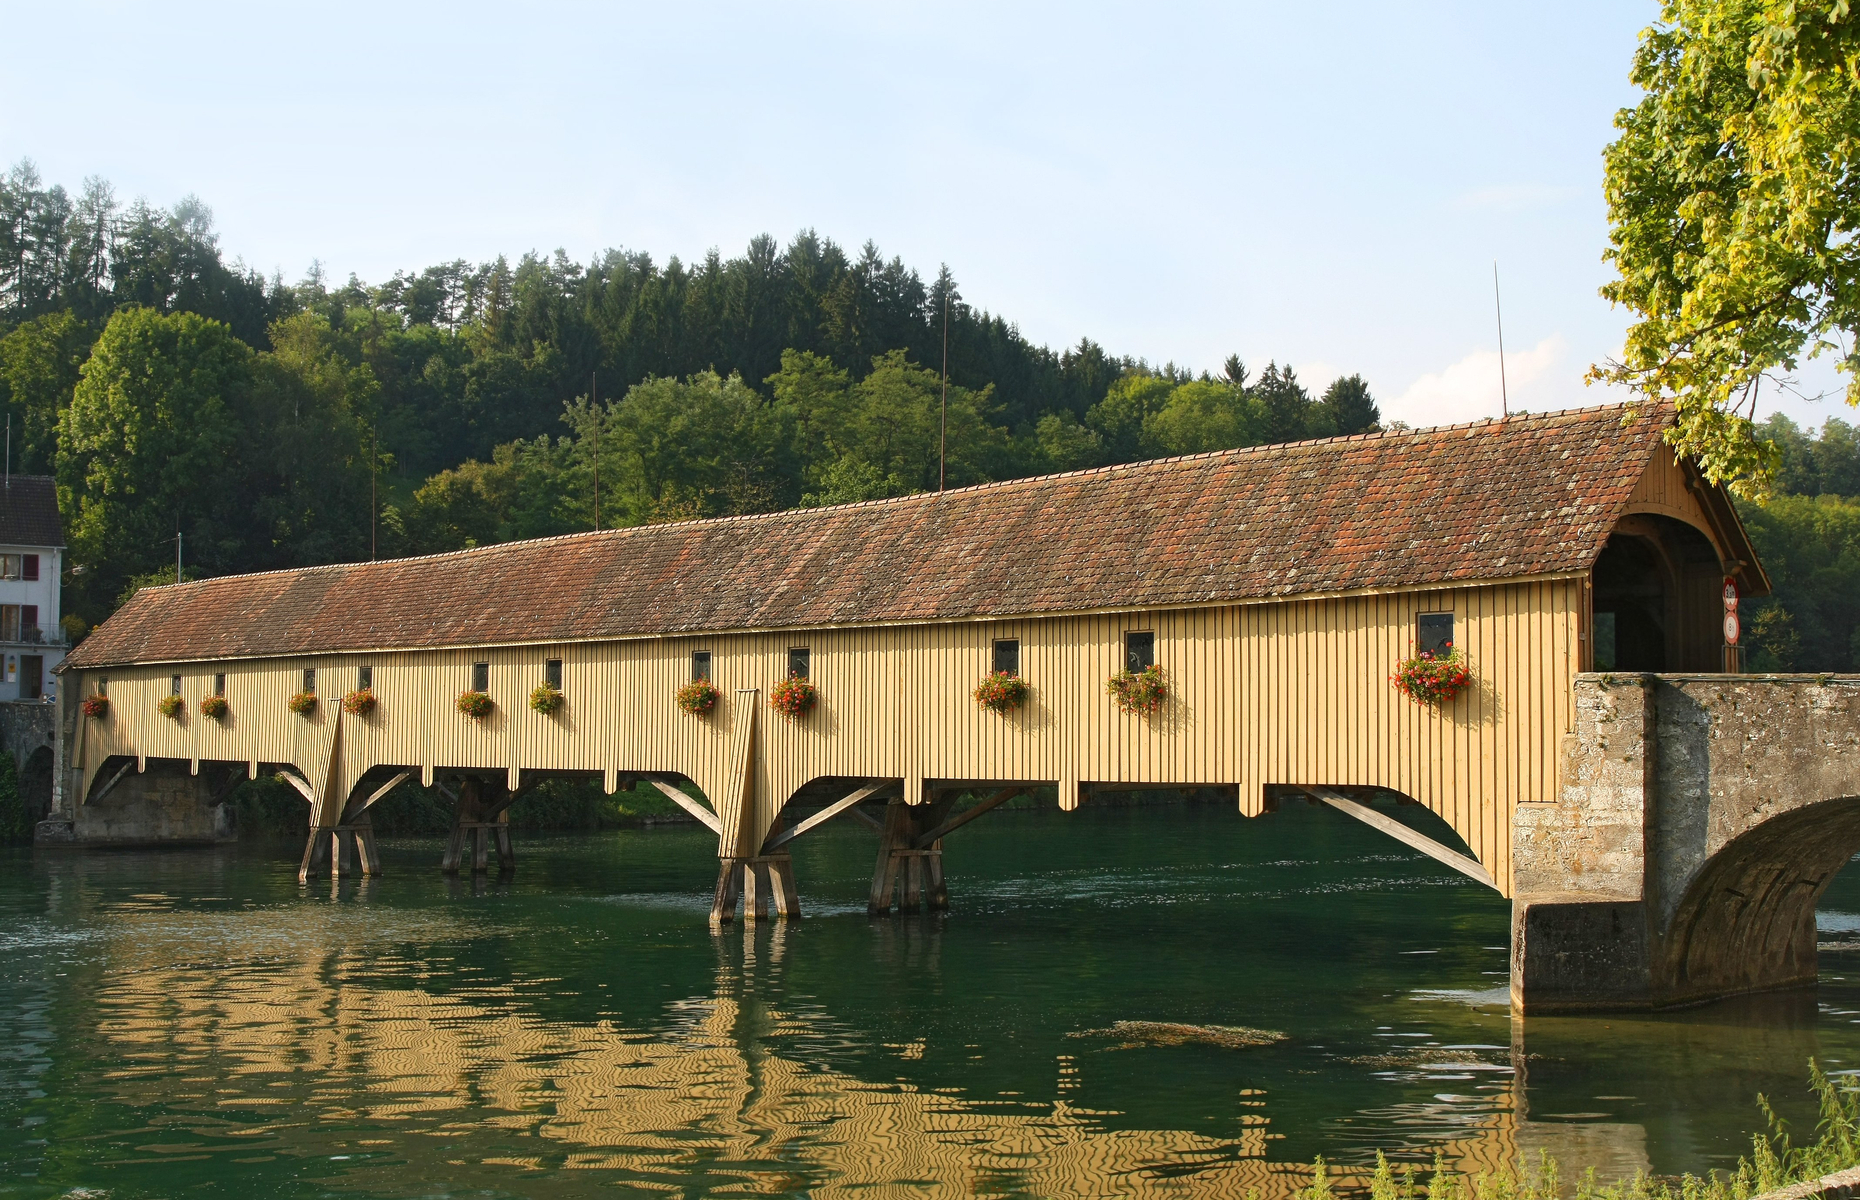 <p>See the system of bridges celebrated in the book, play and movie <em>The Bridges of Madison County</em>. The <a href="https://www.traveliowa.com/trails/covered-bridges-scenic-byway/98/" title="https://www.traveliowa.com/trails/covered-bridges-scenic-byway/98/">Covered Bridges Scenic Byway</a> connects an old townsquare, the birthplace of John Wayne, the Iowa Quilt Museum, recreational parks and trails, and historic sites. Of course, the 82-mile route also serves up lots of beautiful covered bridges.</p>